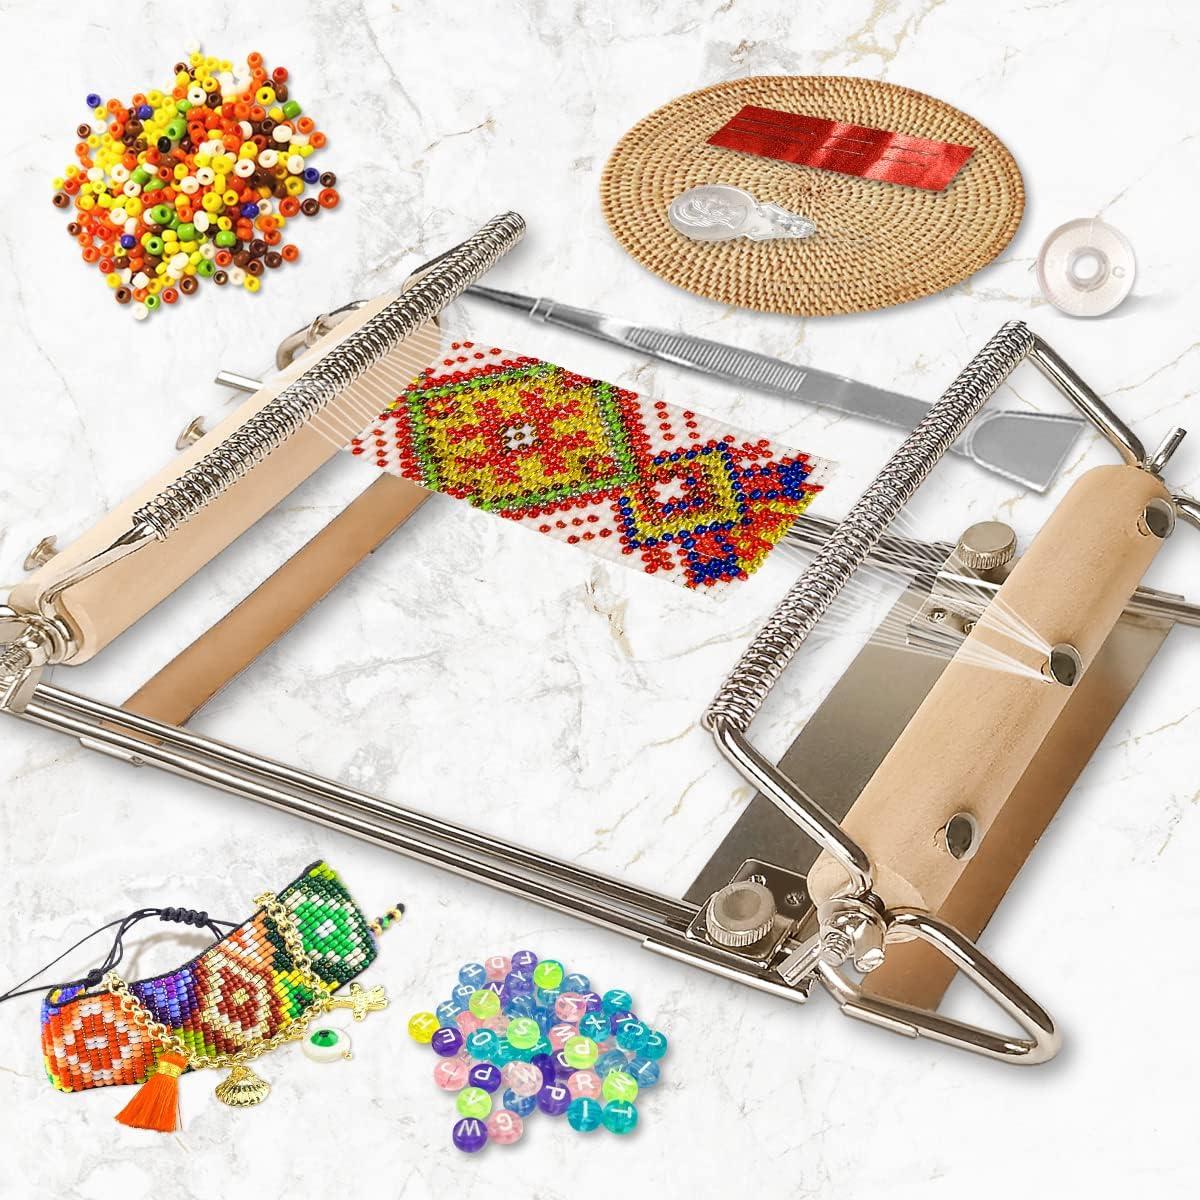 PP OPOUNT Bead Loom Kit, Beading Supplies with 9700 PCS Seed Beads, Tray,  Scissors Making Accessories, Beading Loom Kits for Adults Jewelry Making